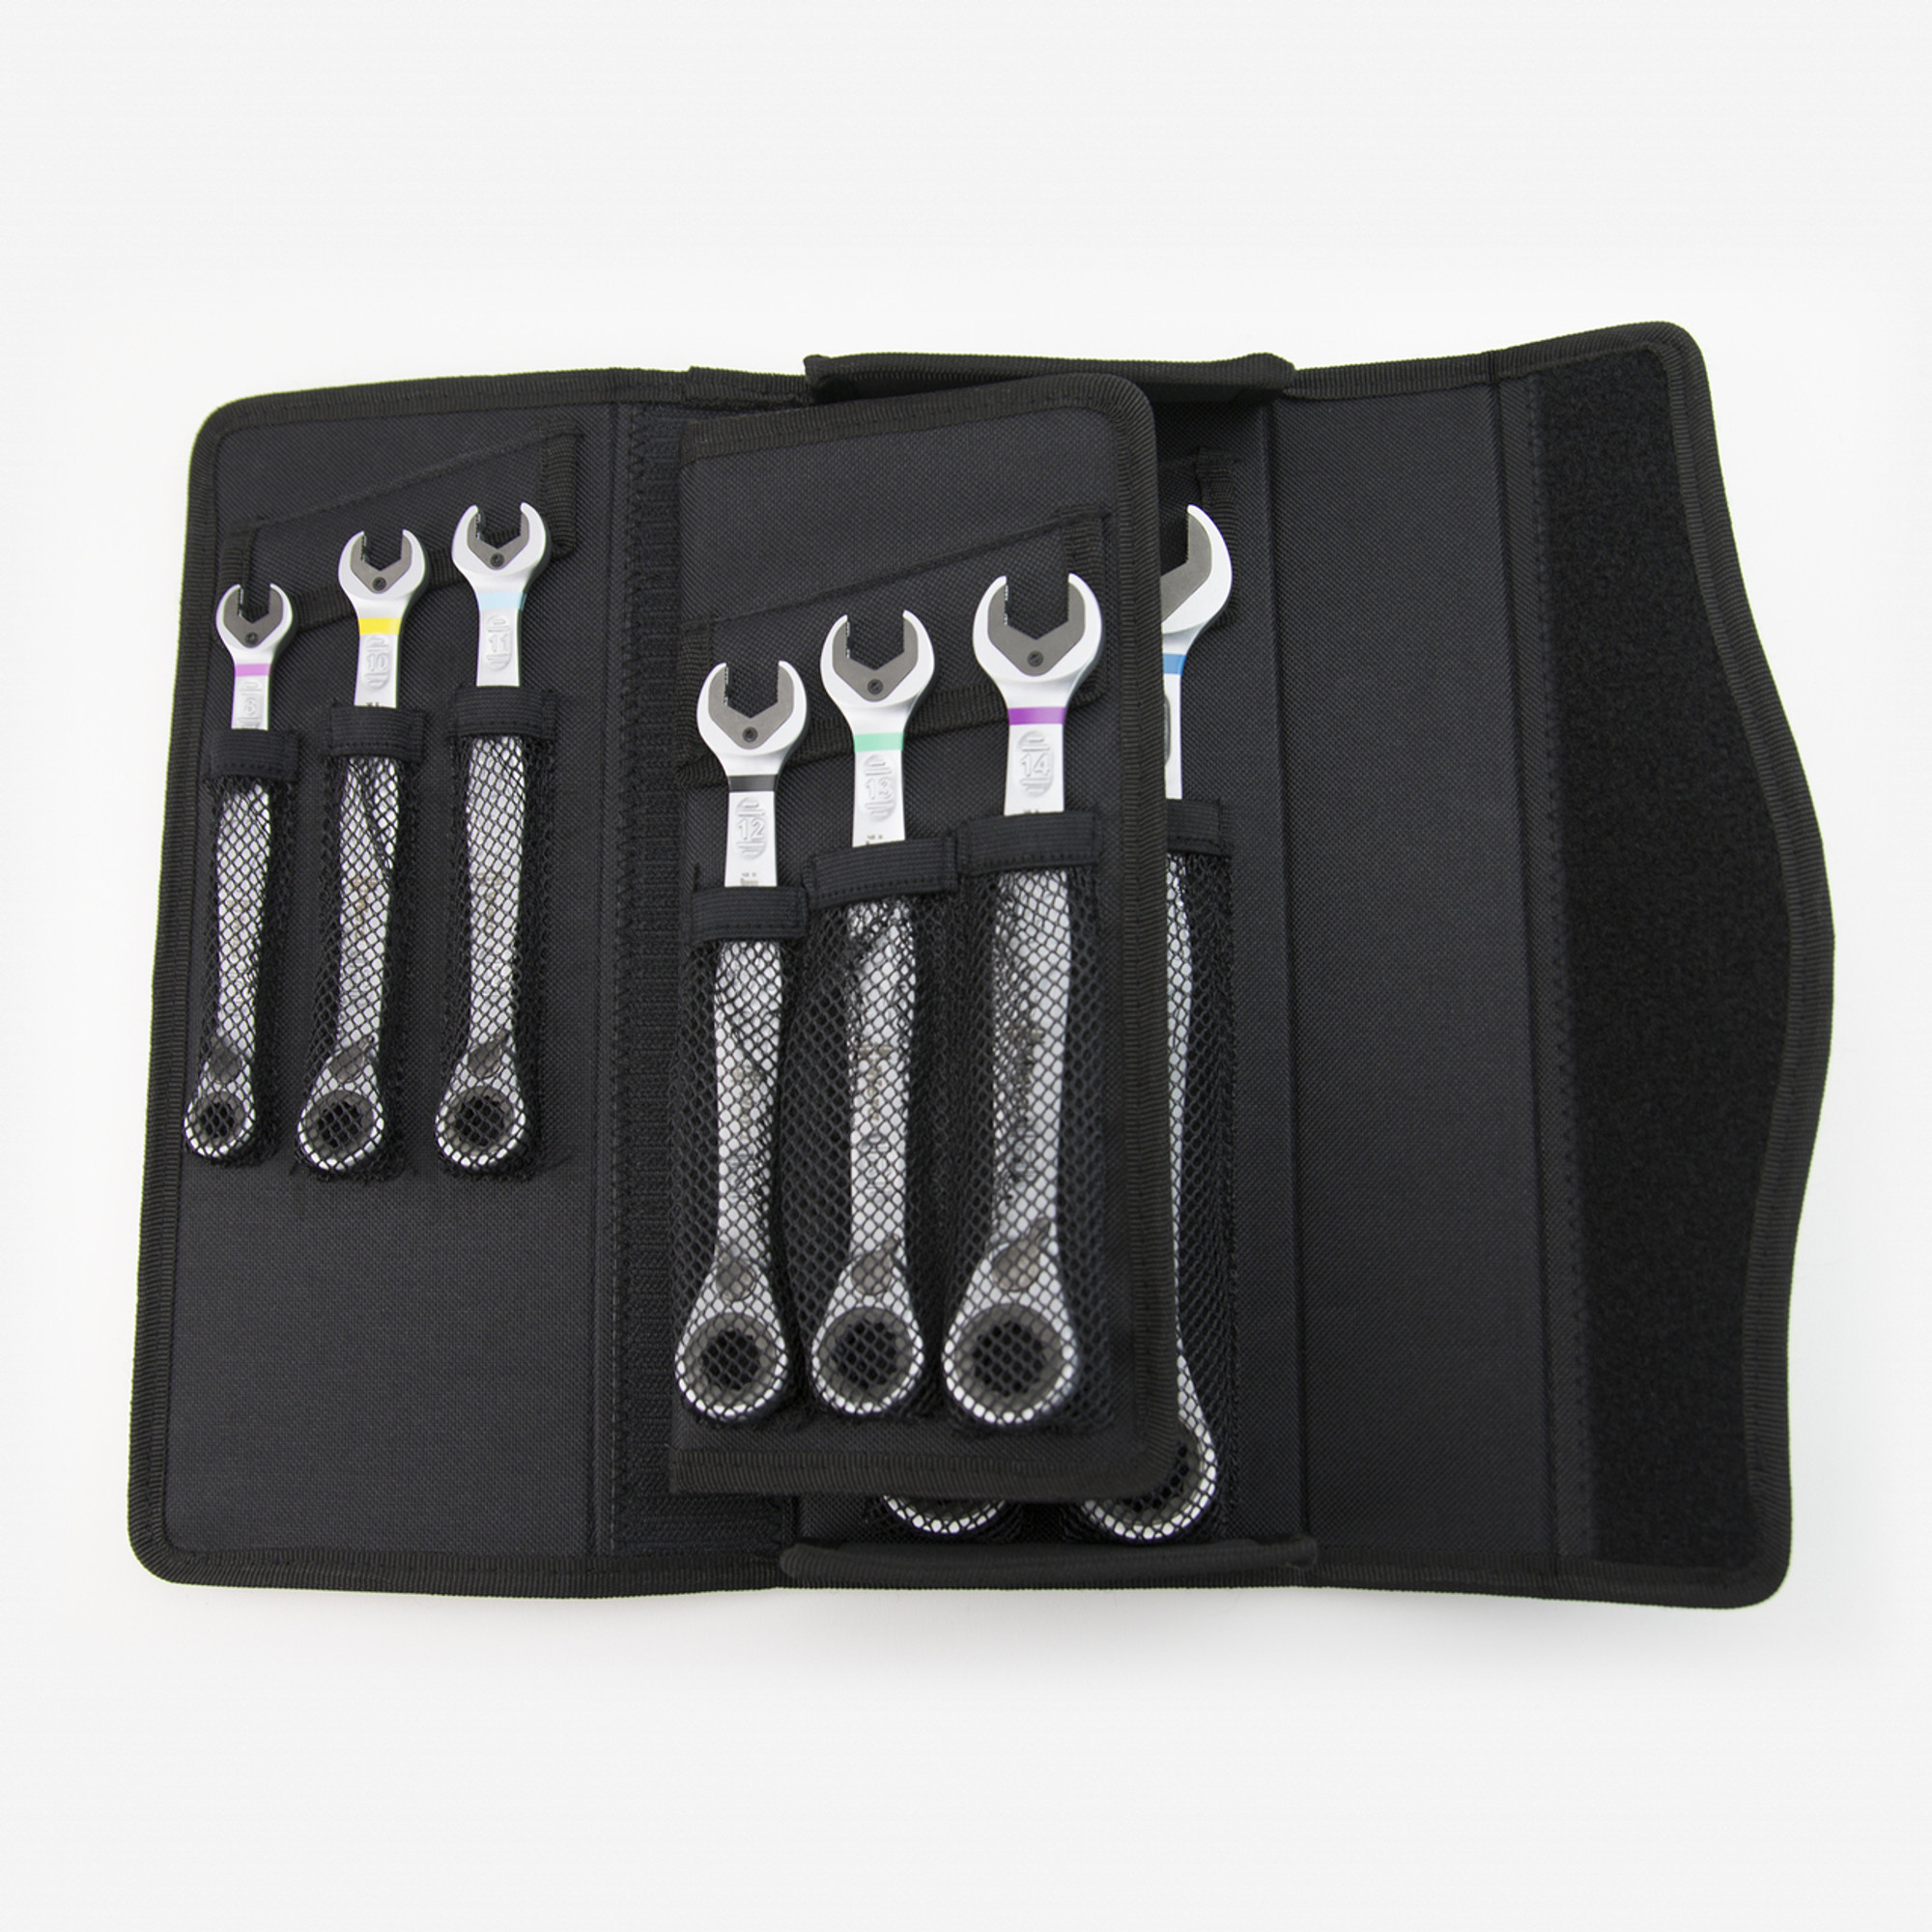 Wera 020091 Joker Combination Wrench Pouch Set with Switch - 11